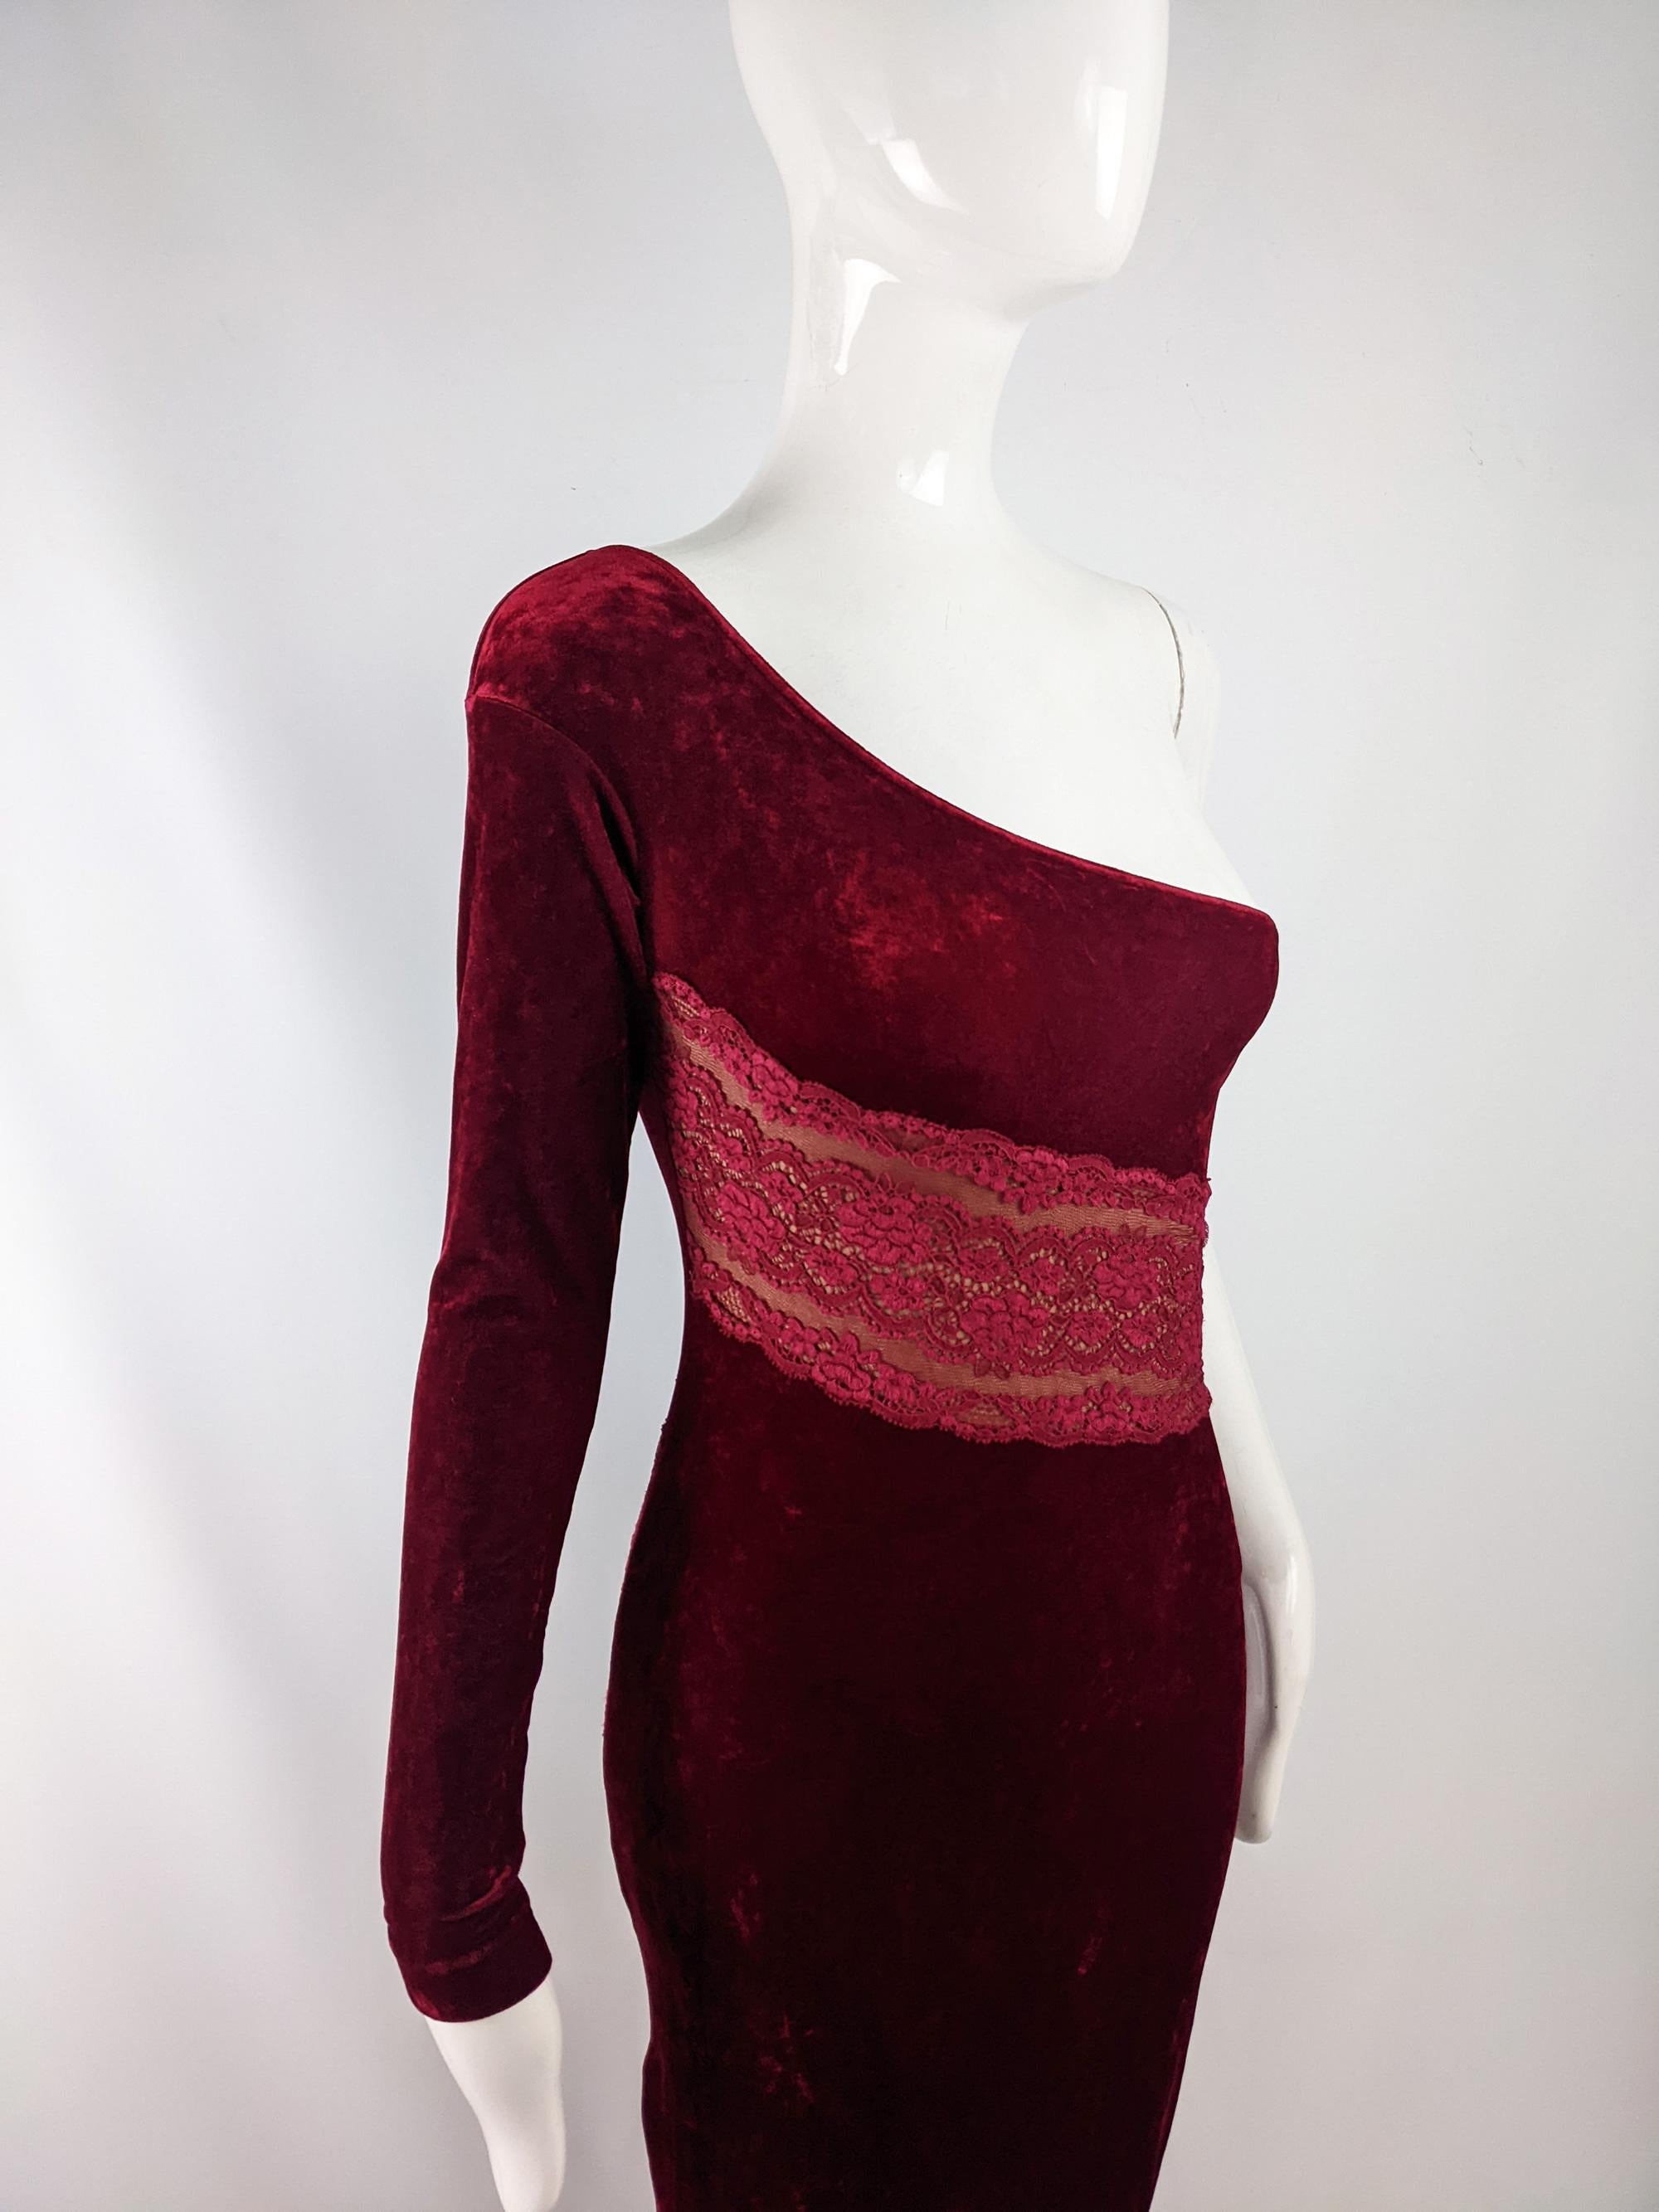 A sexy vintage womens evening dress from the 80s by luxury Italian fashion house, La Perla for their Ritmo di Perla line. In a sumptuous, deep red stretch velour which gives a body conscious fit with a very slightly sheer nude jersey panel at the